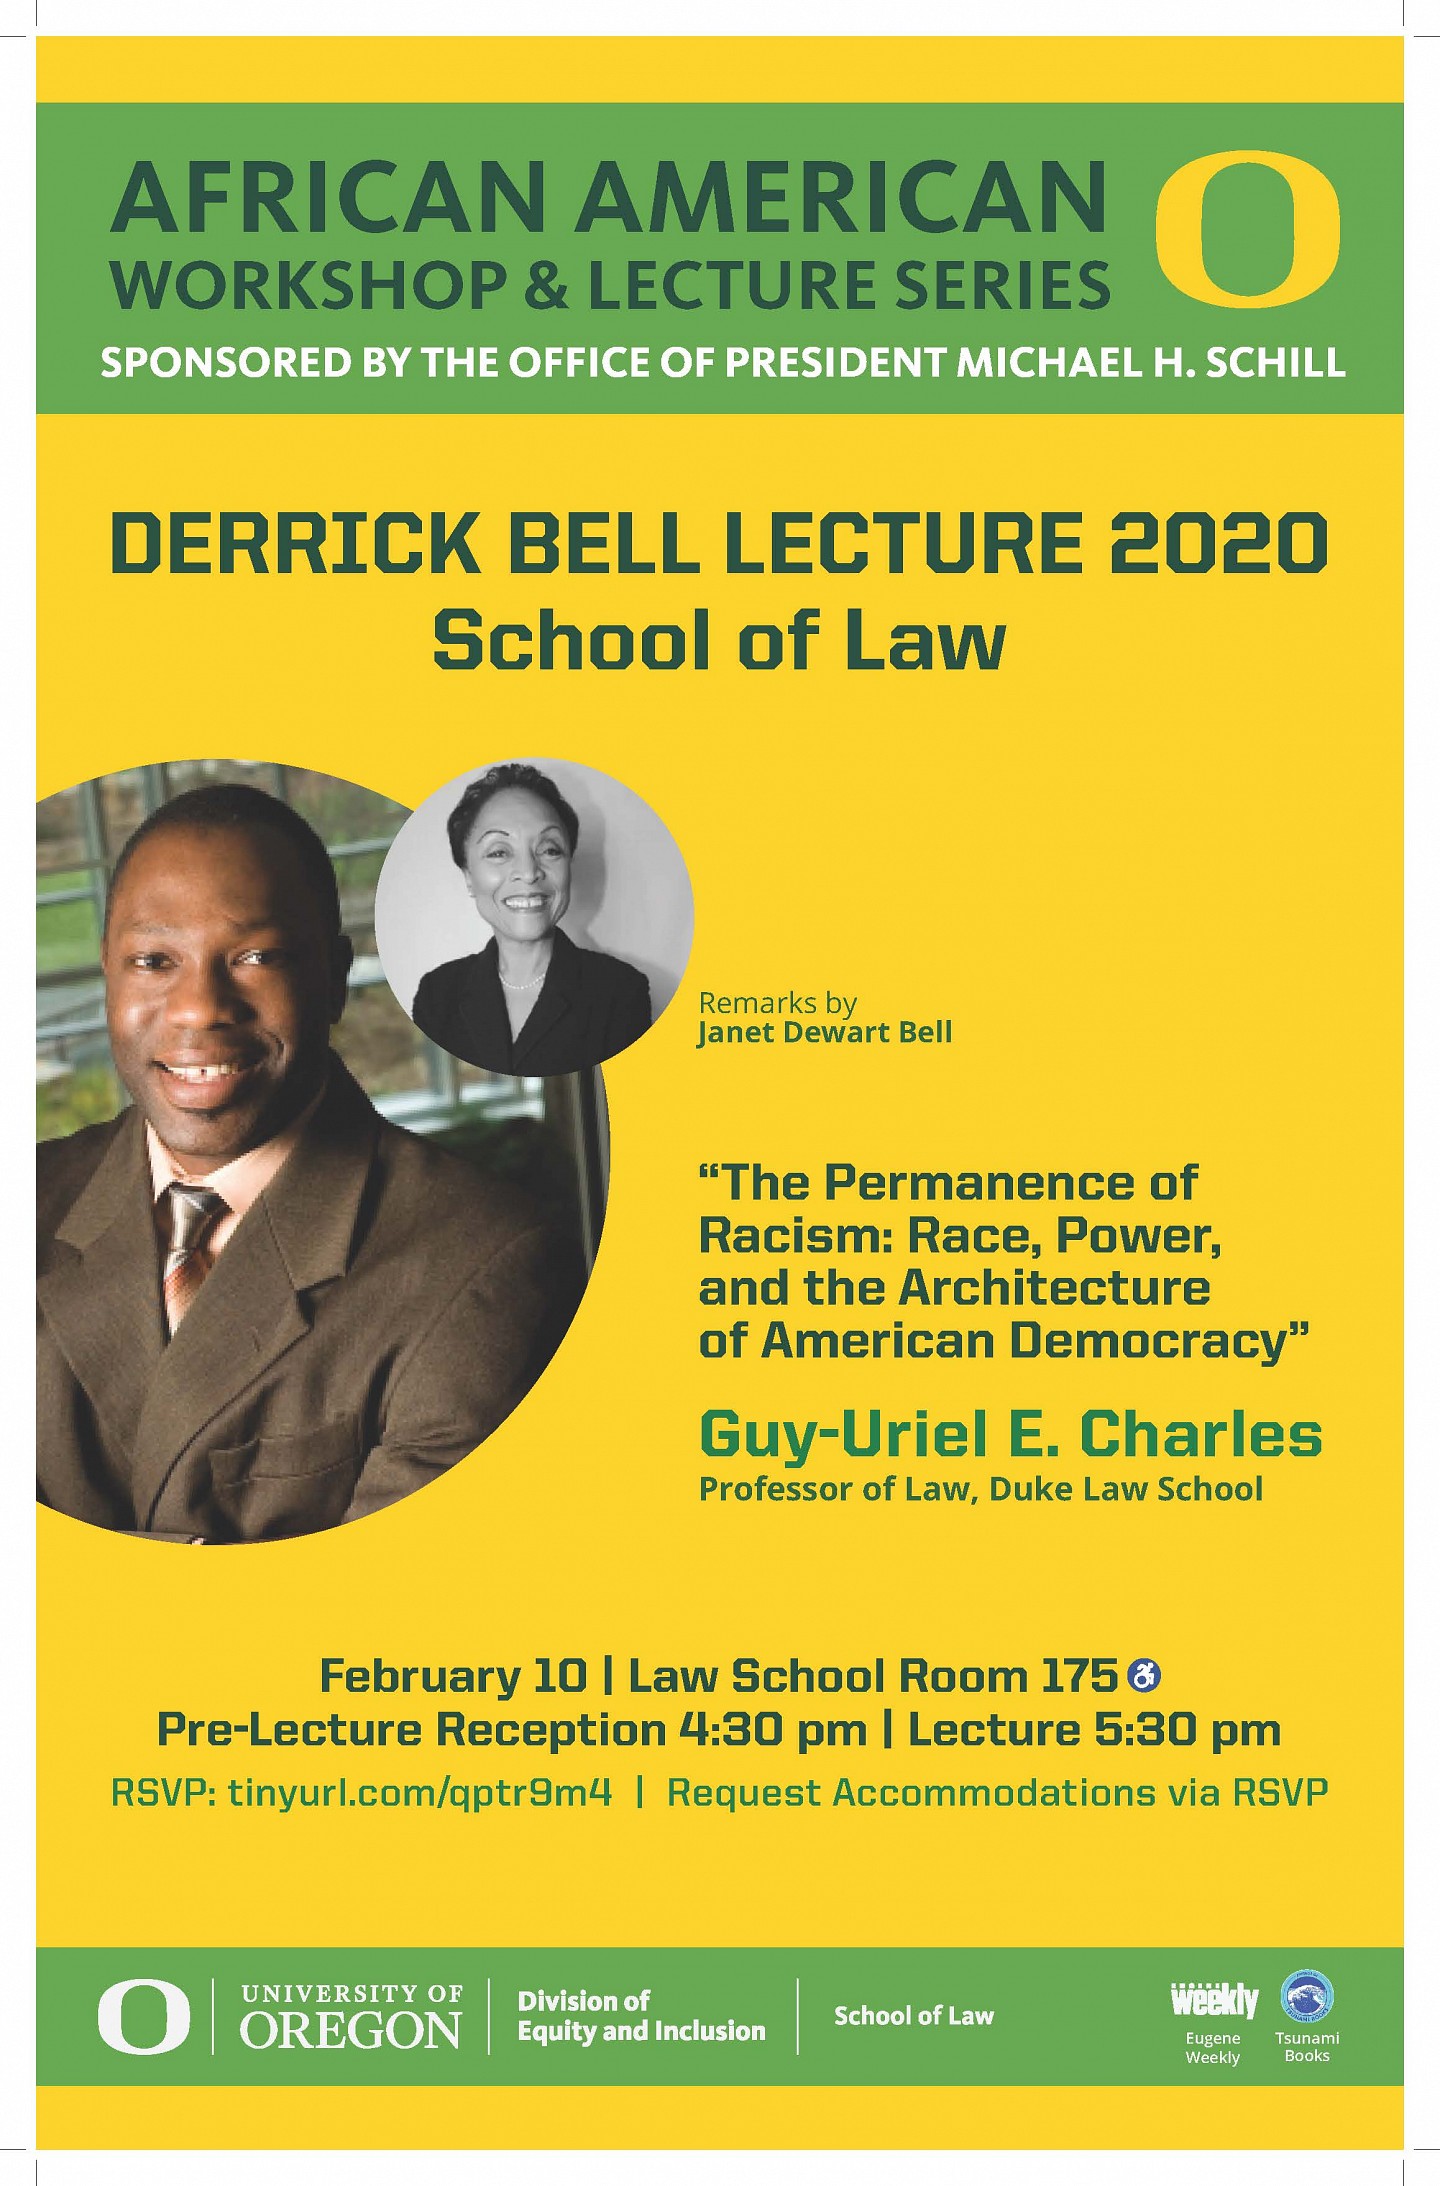 Poster of African American Workshop and Lecture Series and 2020 Derrick Bell Lecture School of Law with Guy-Uriel Charles and Janet Dewart Bell,  February 10 Law School 175